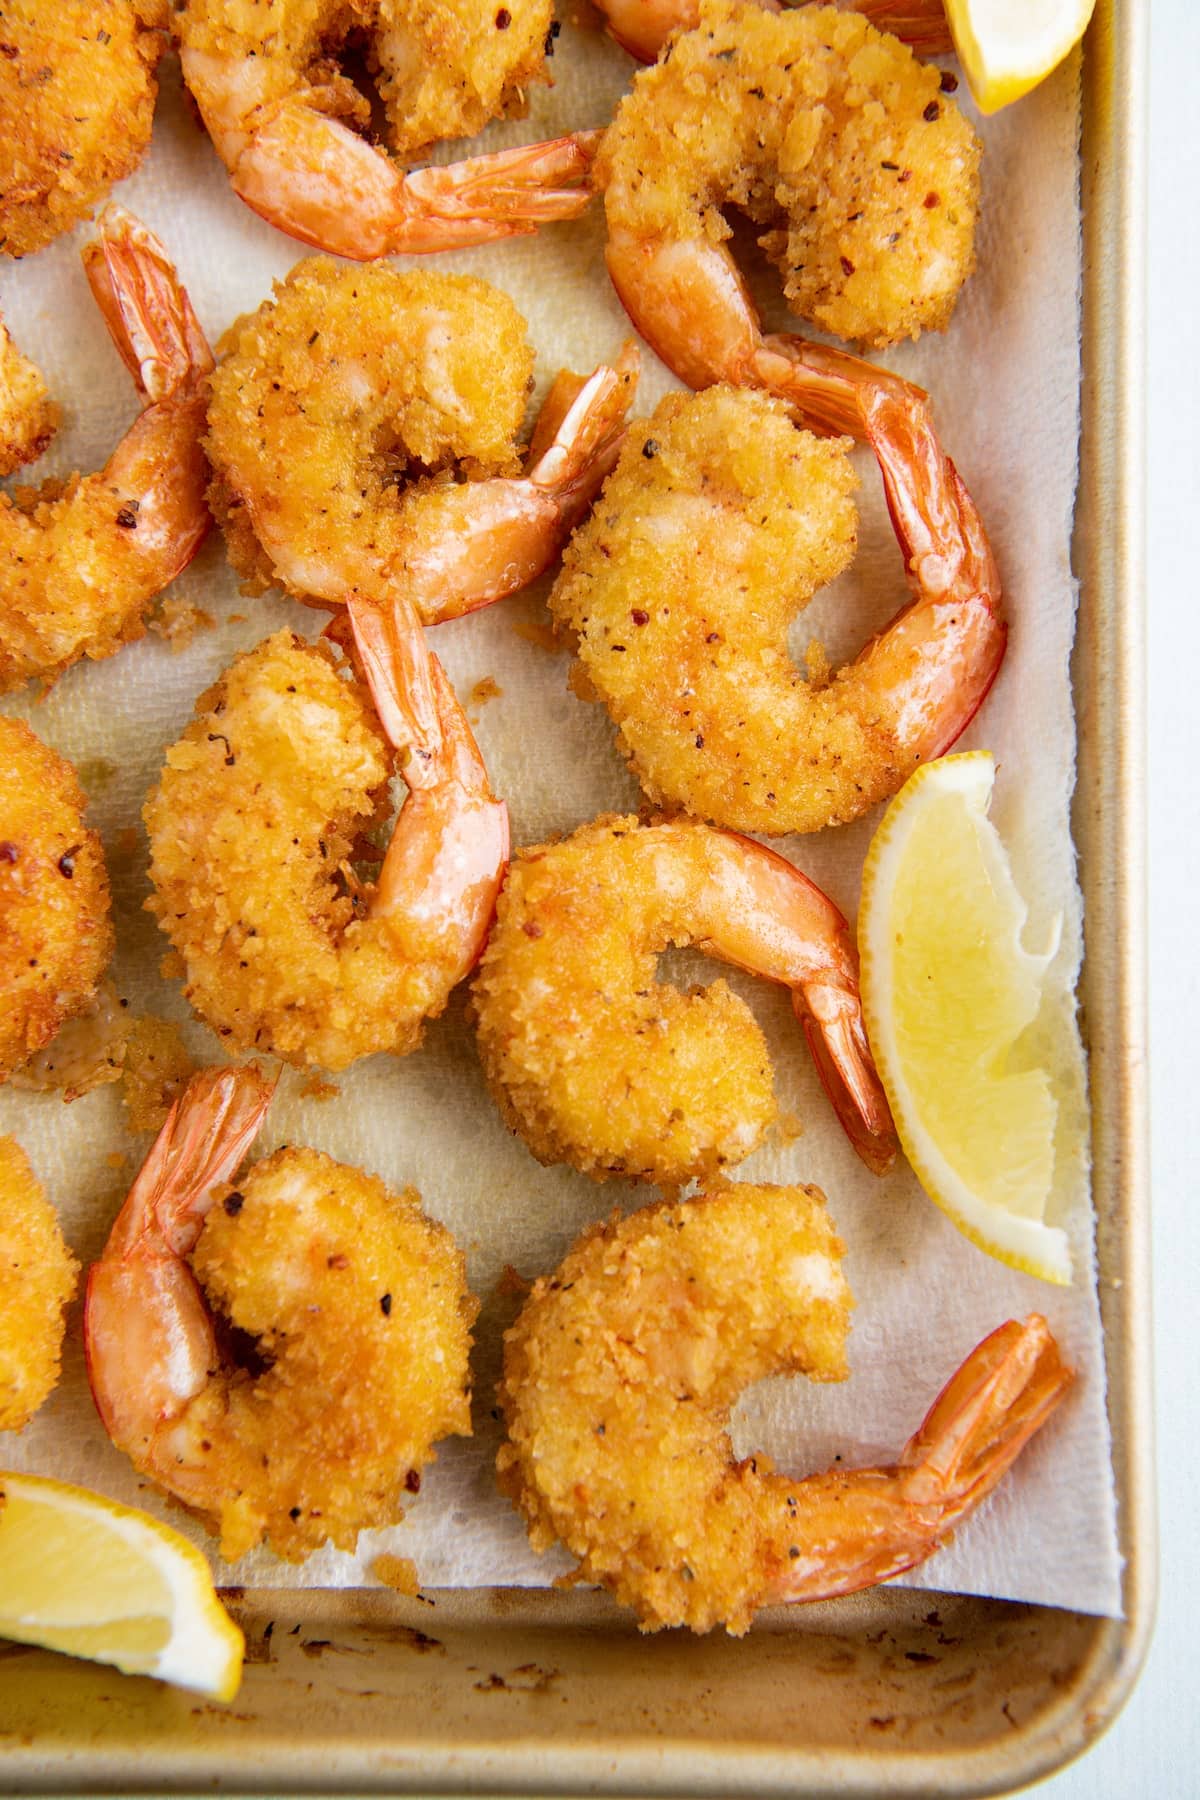 Shrimp draining after frying on a cookie sheet lined with paper towels.